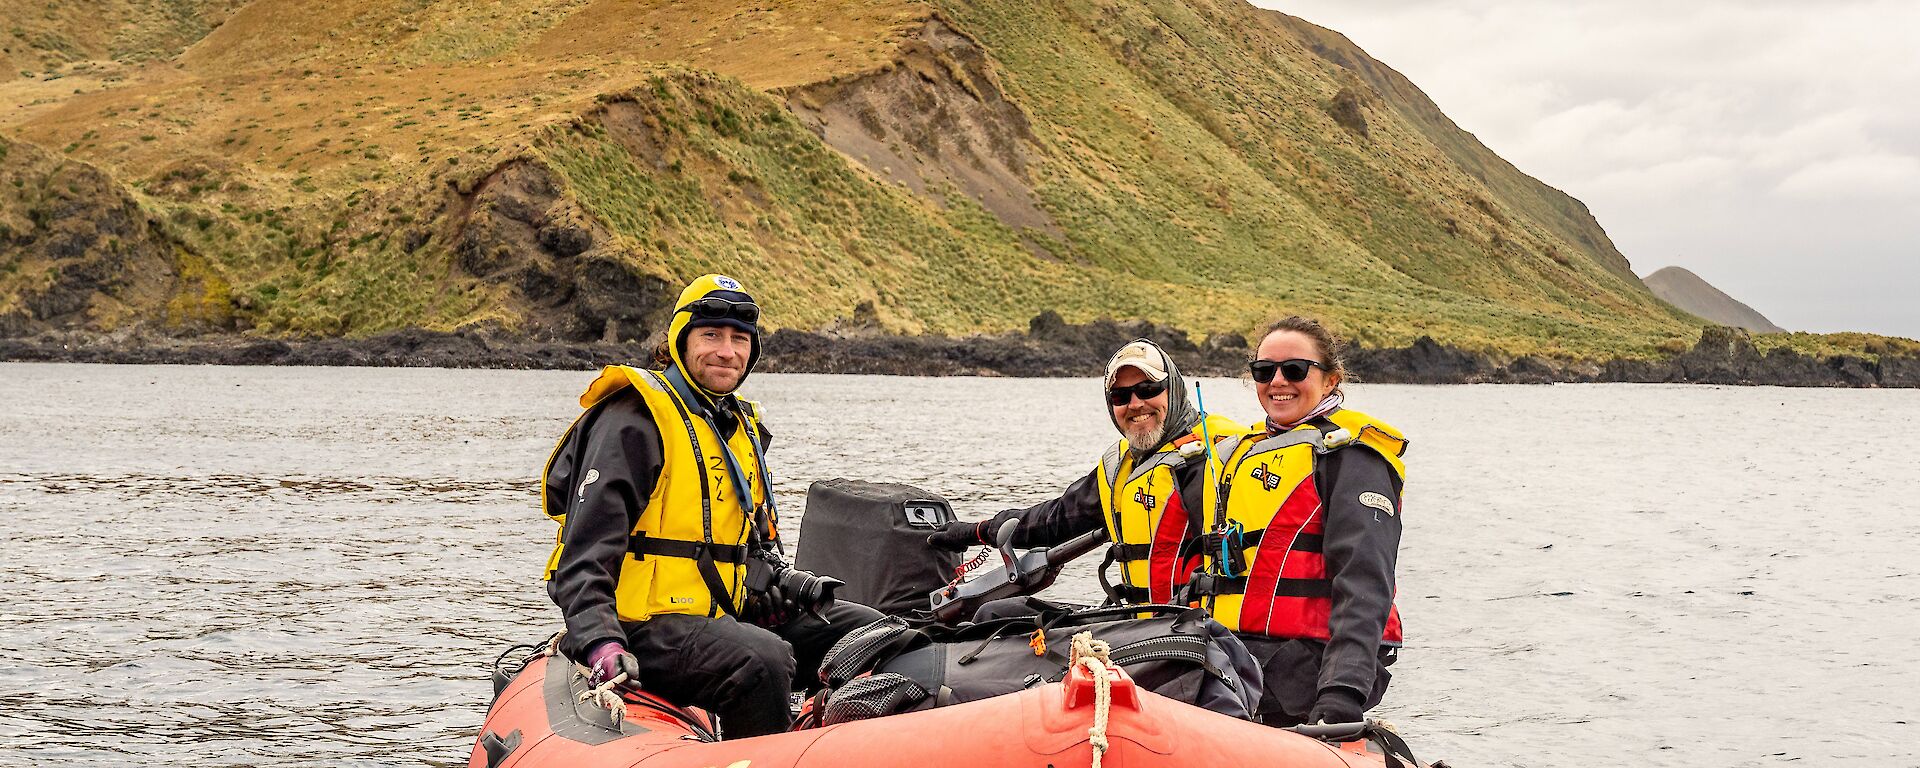 Three people in life jackets sit in a red dinghy with a barren hill behind them